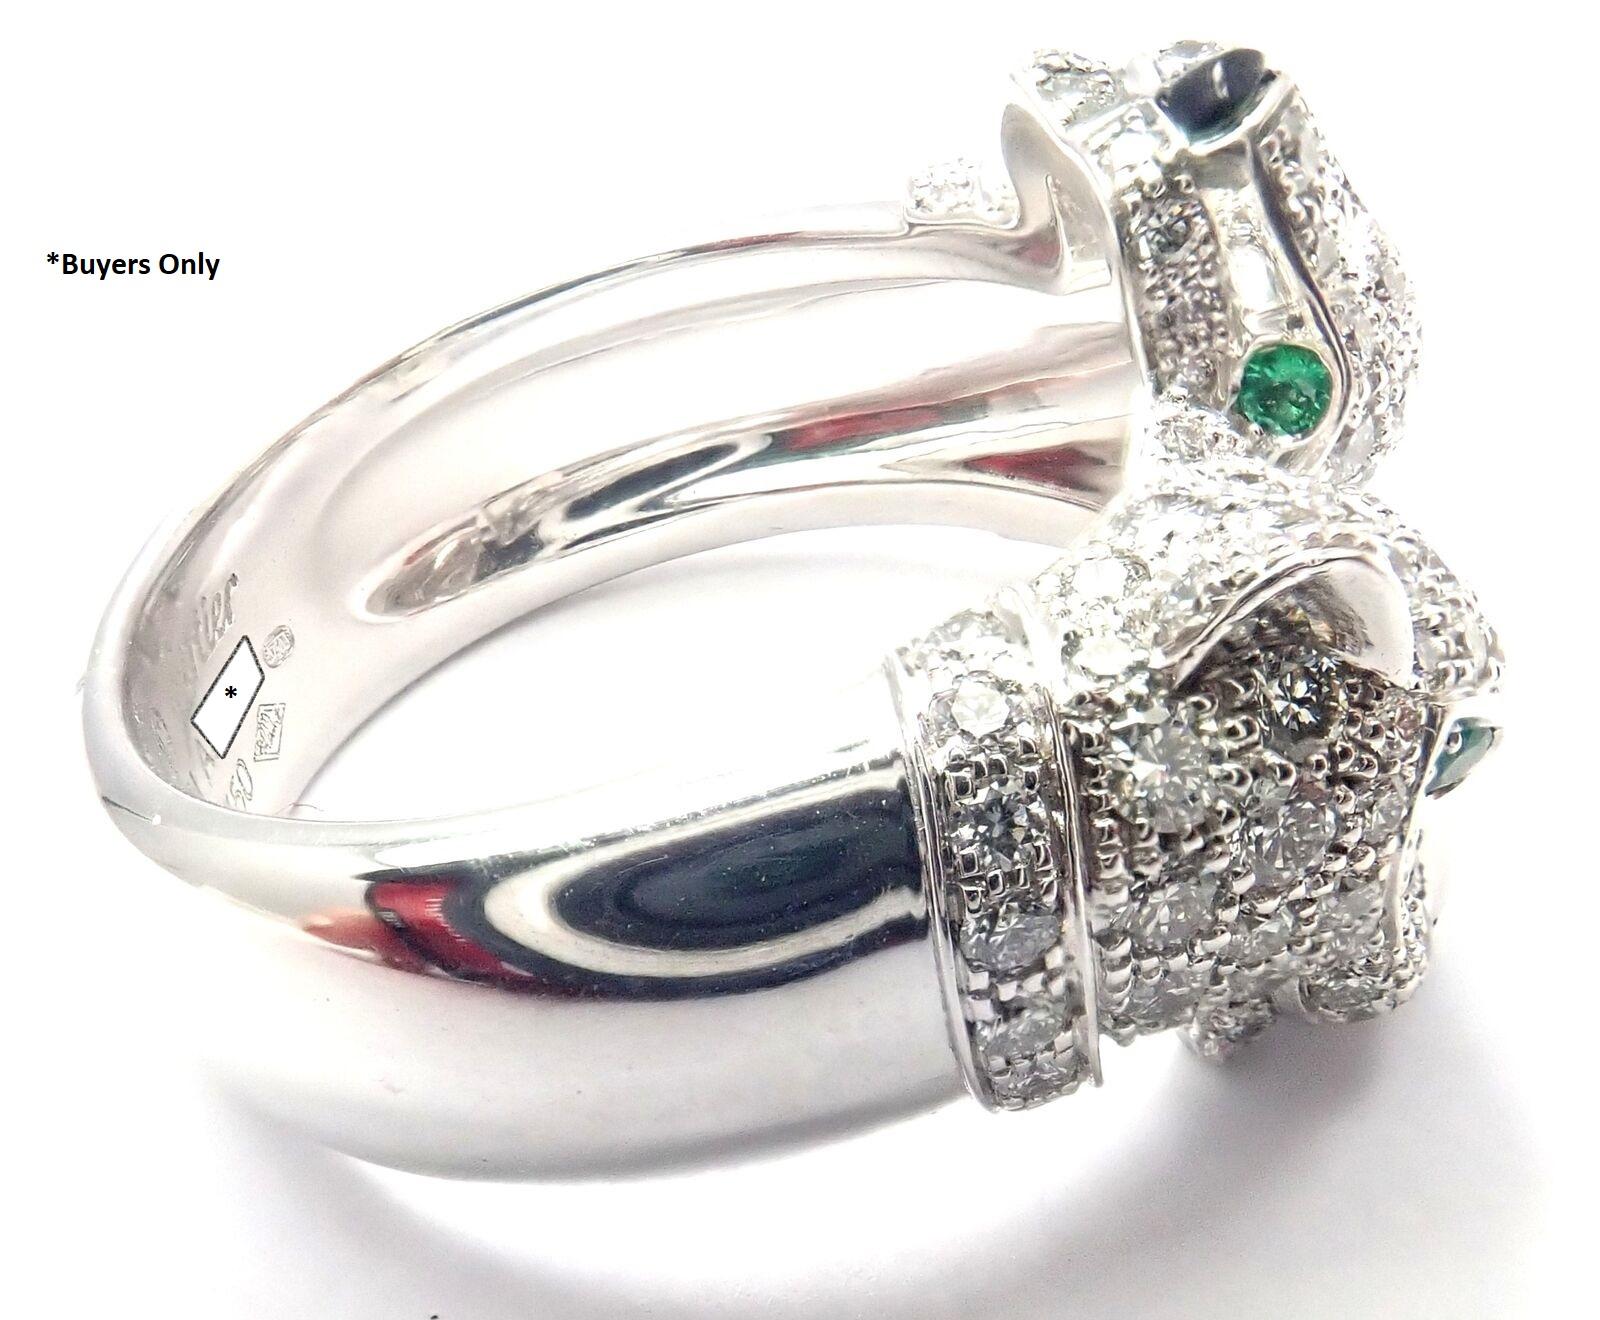 Cartier Double Panther Panthere Diamond Emerald Onyx White Gold Ring 1